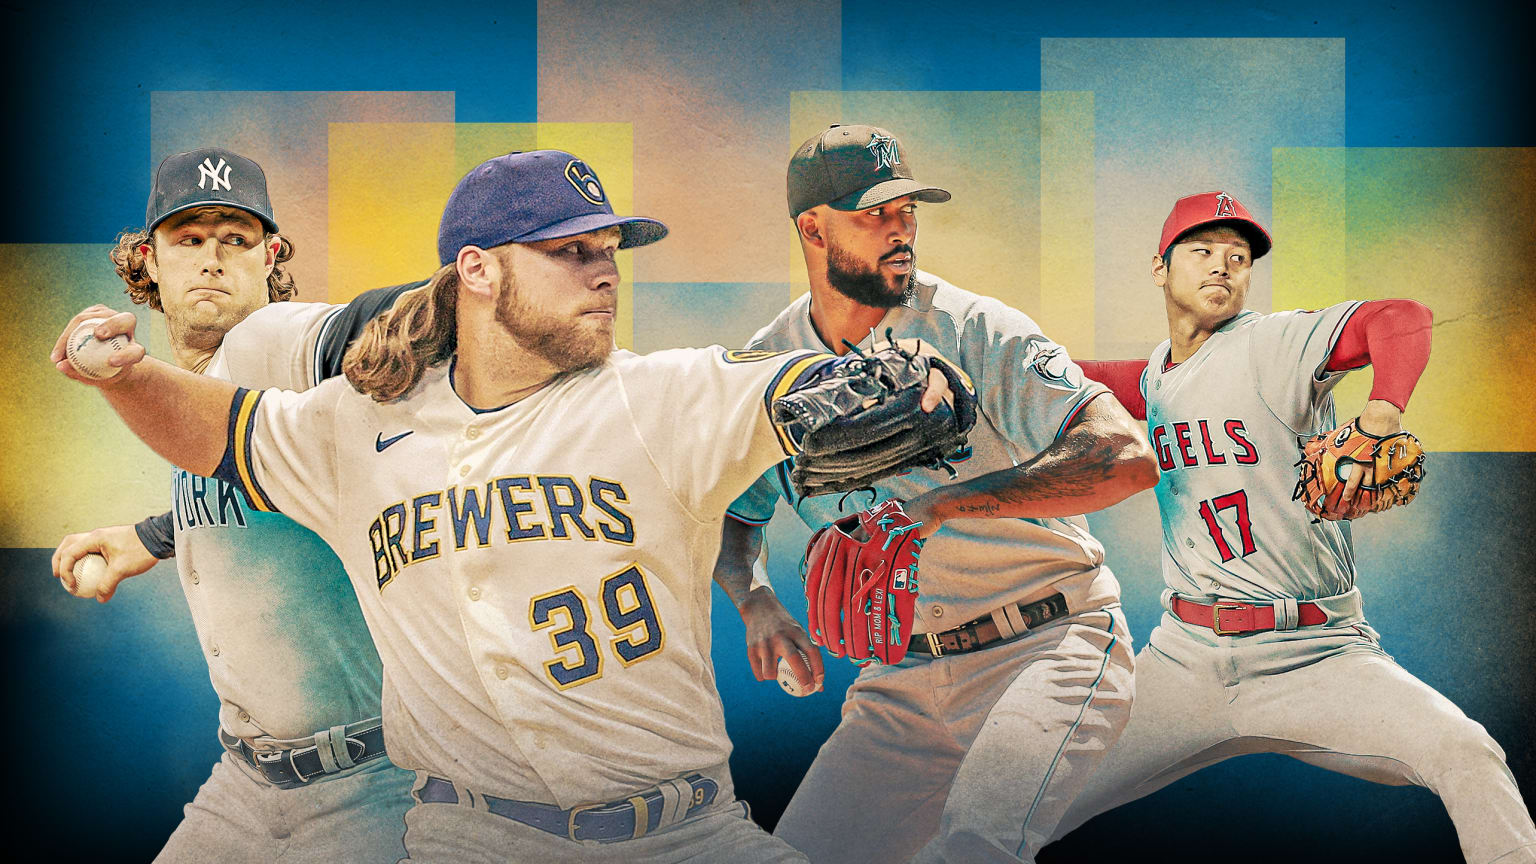 A photo illustration showing 4 top pitchers against a blue-and-yellow background